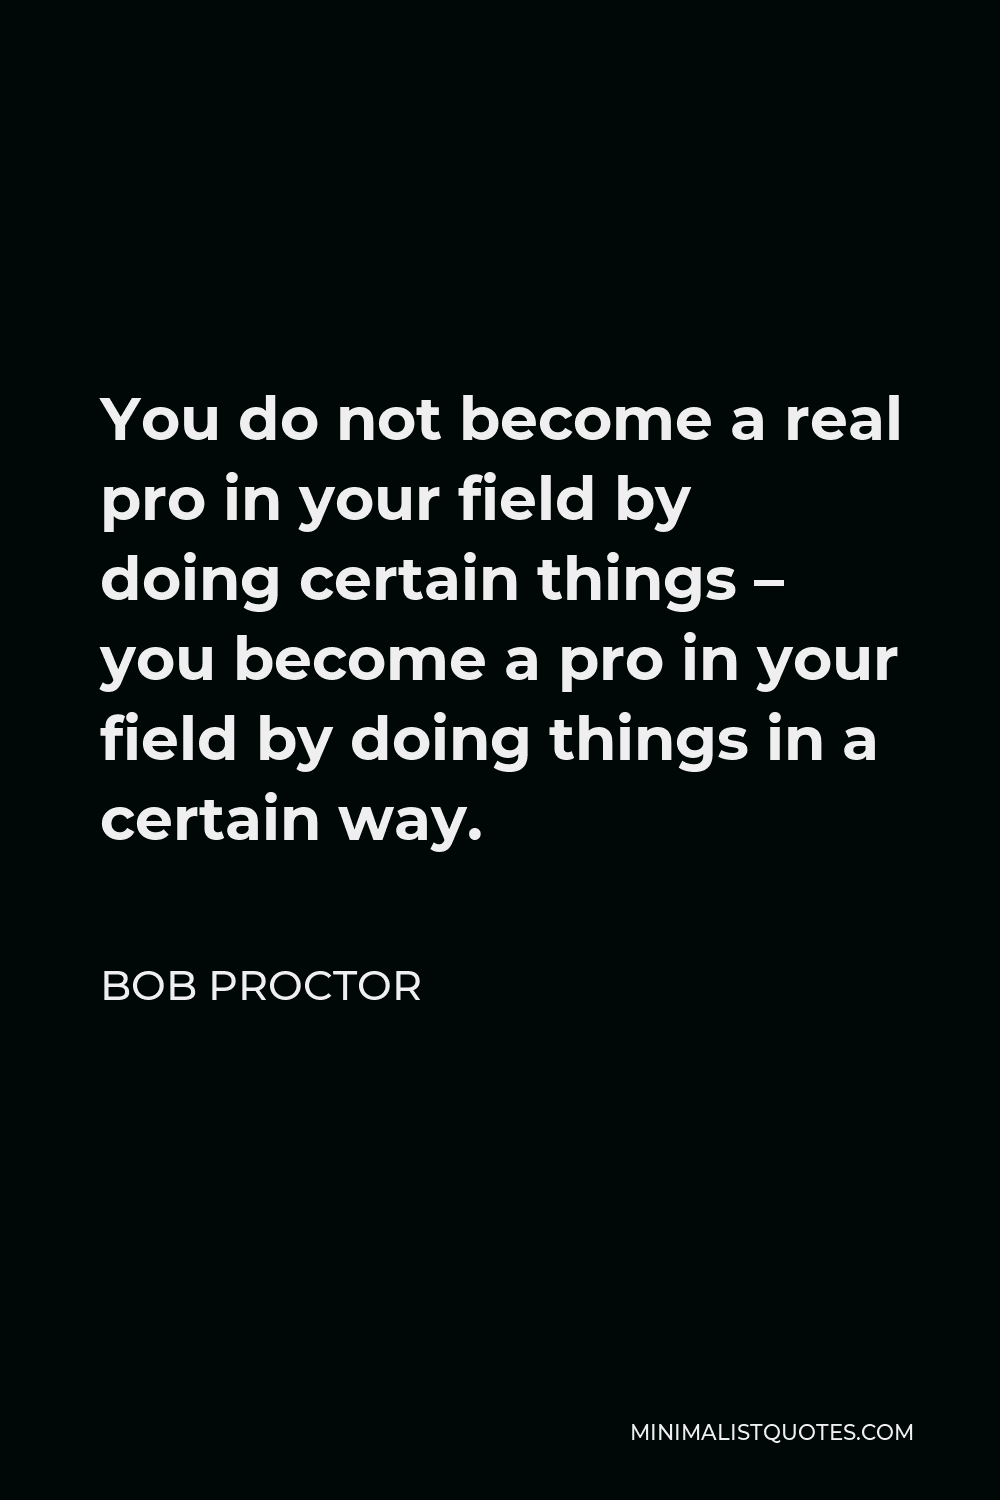 Bob Proctor Quote - You do not become a real pro in your field by doing certain things – you become a pro in your field by doing things in a certain way.